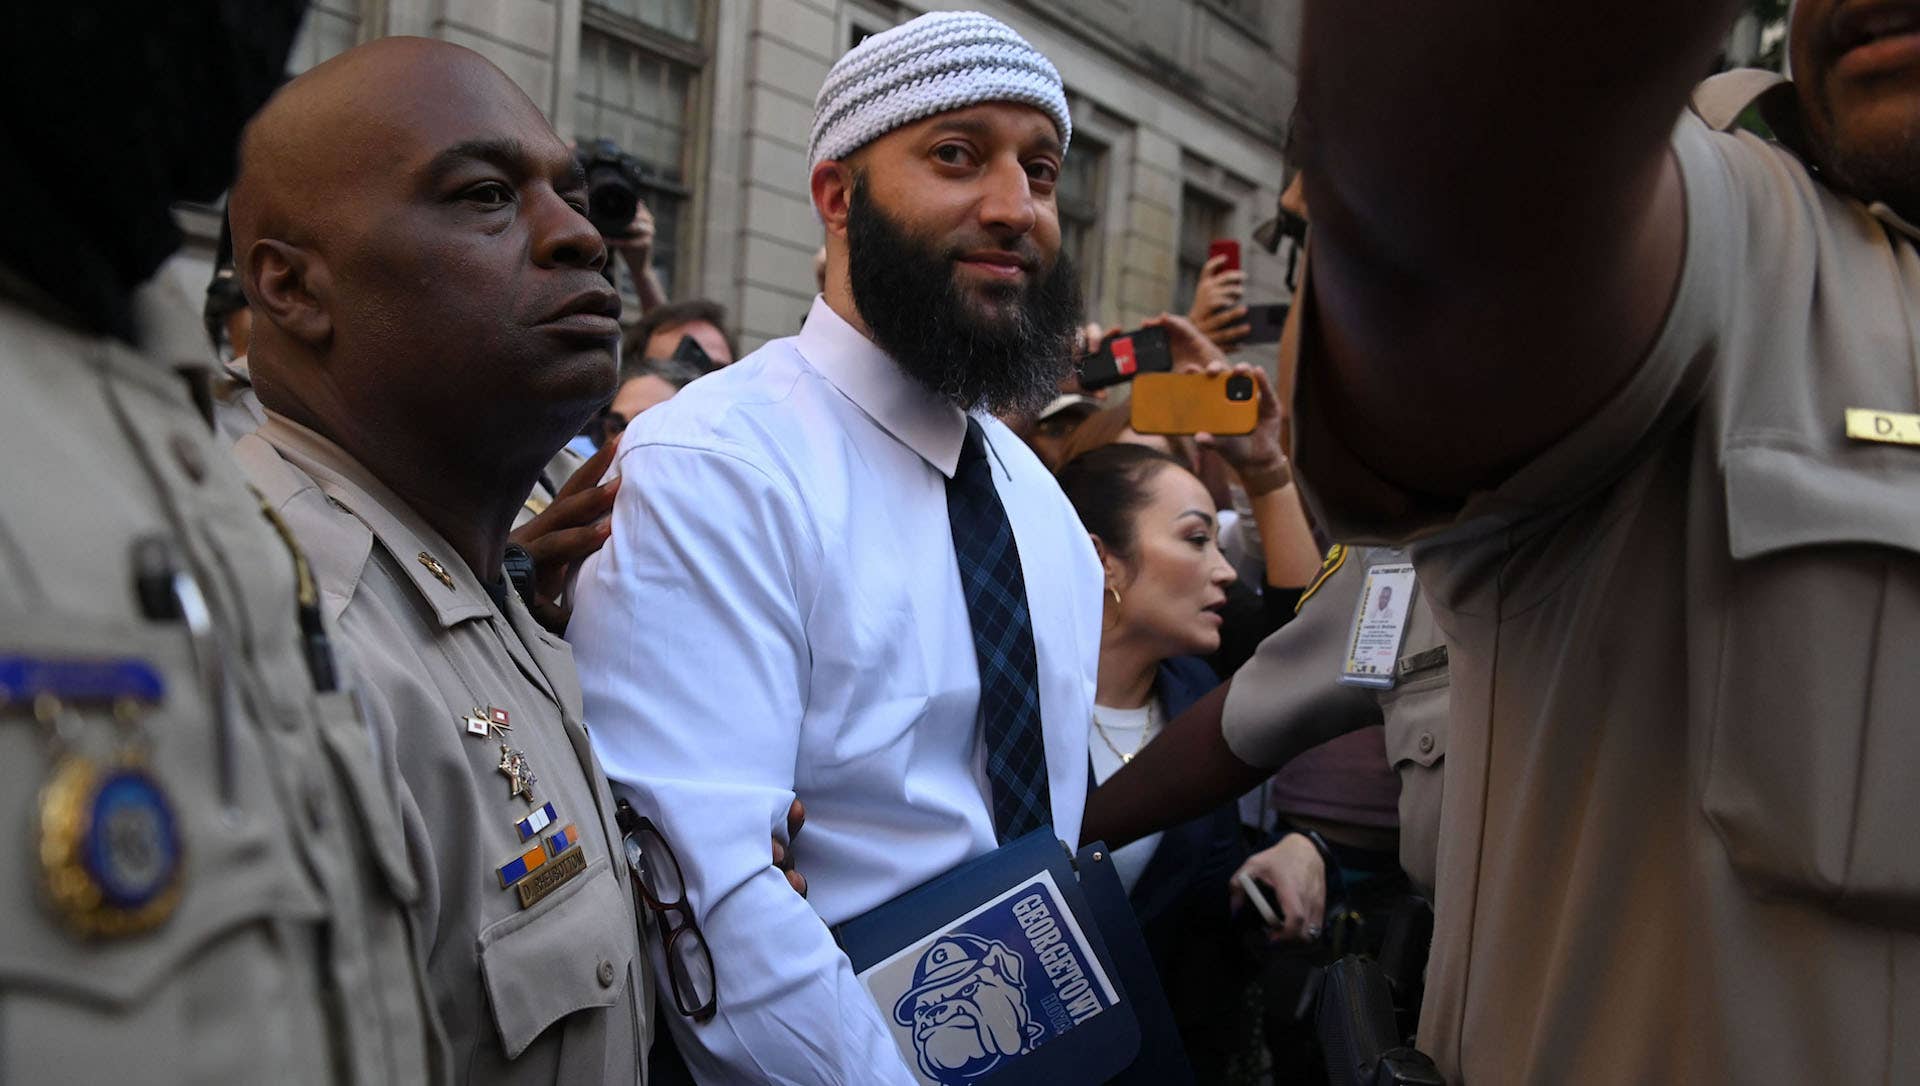 Adnan Syed leaves the courthouse